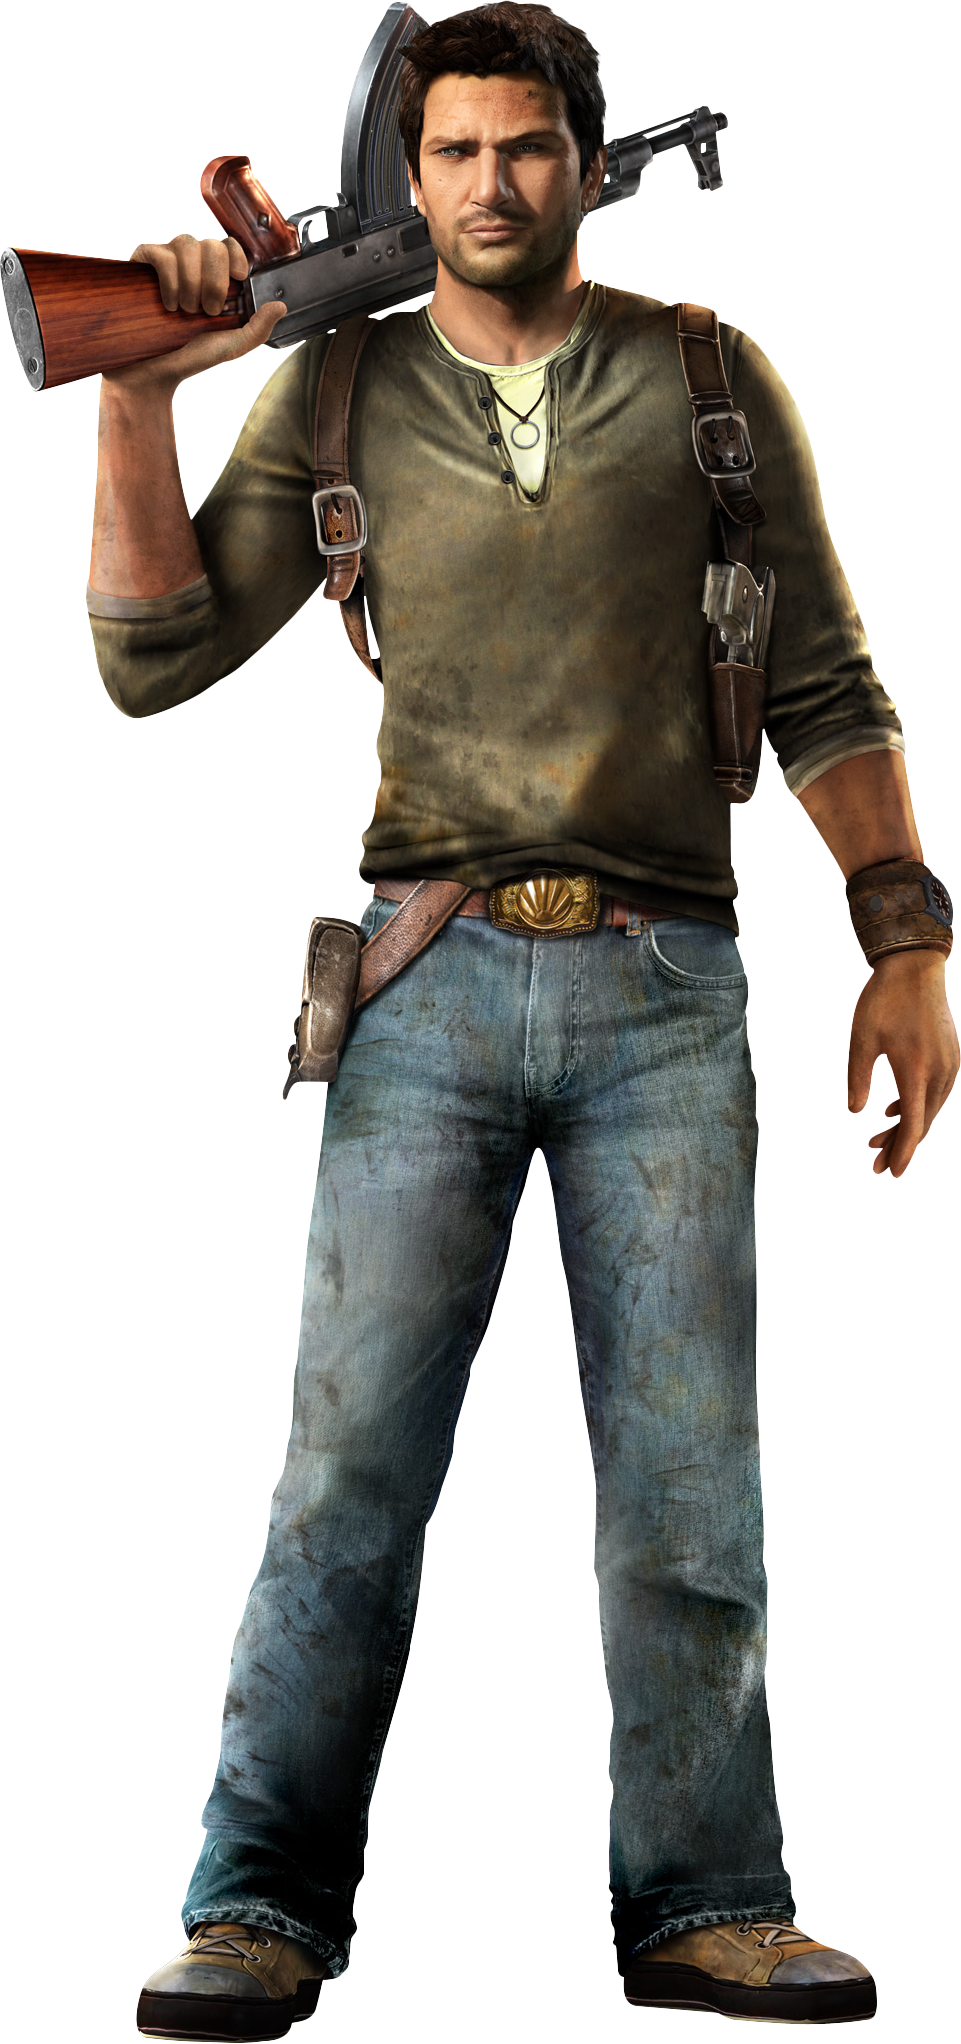 Image - Nathan Drake.png | DEATH BATTLE Wiki | FANDOM powered by Wikia